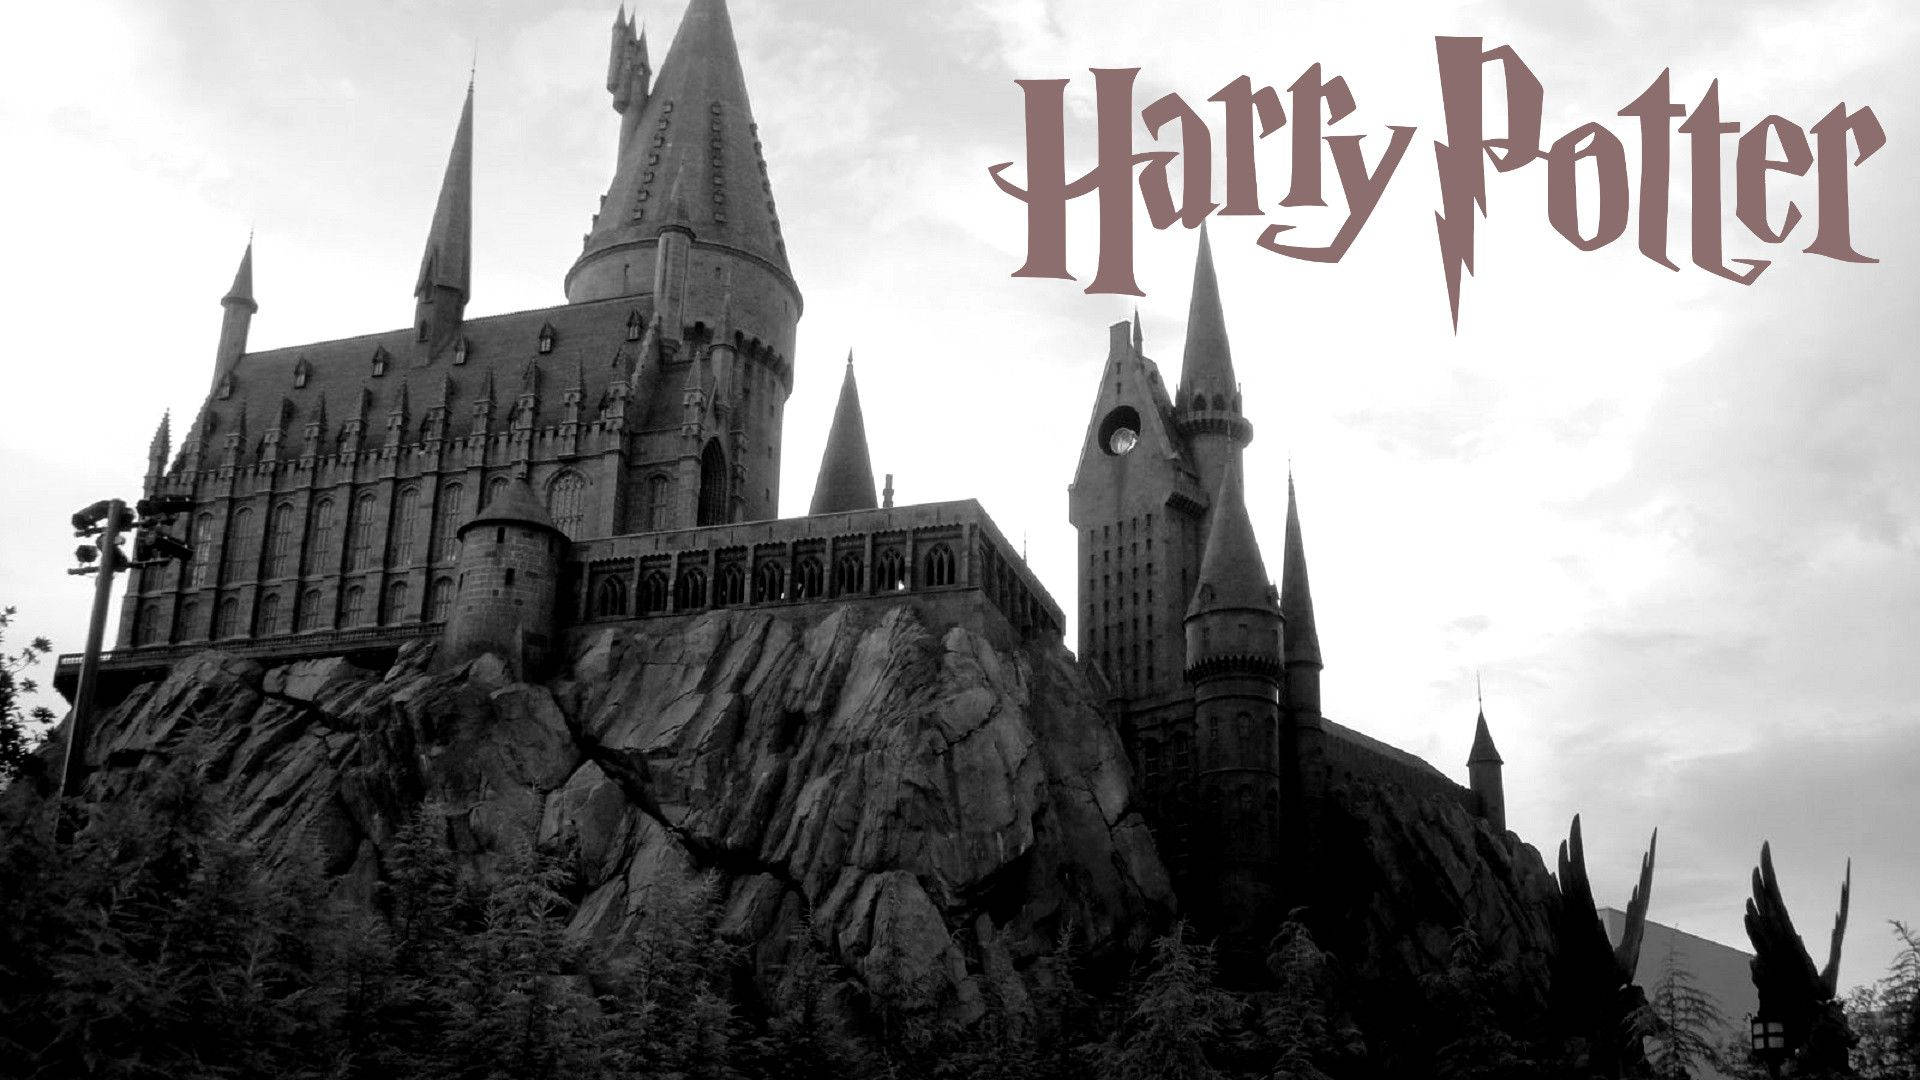 True to its name, the gloomy yet iconic Hogwarts castle Wallpaper